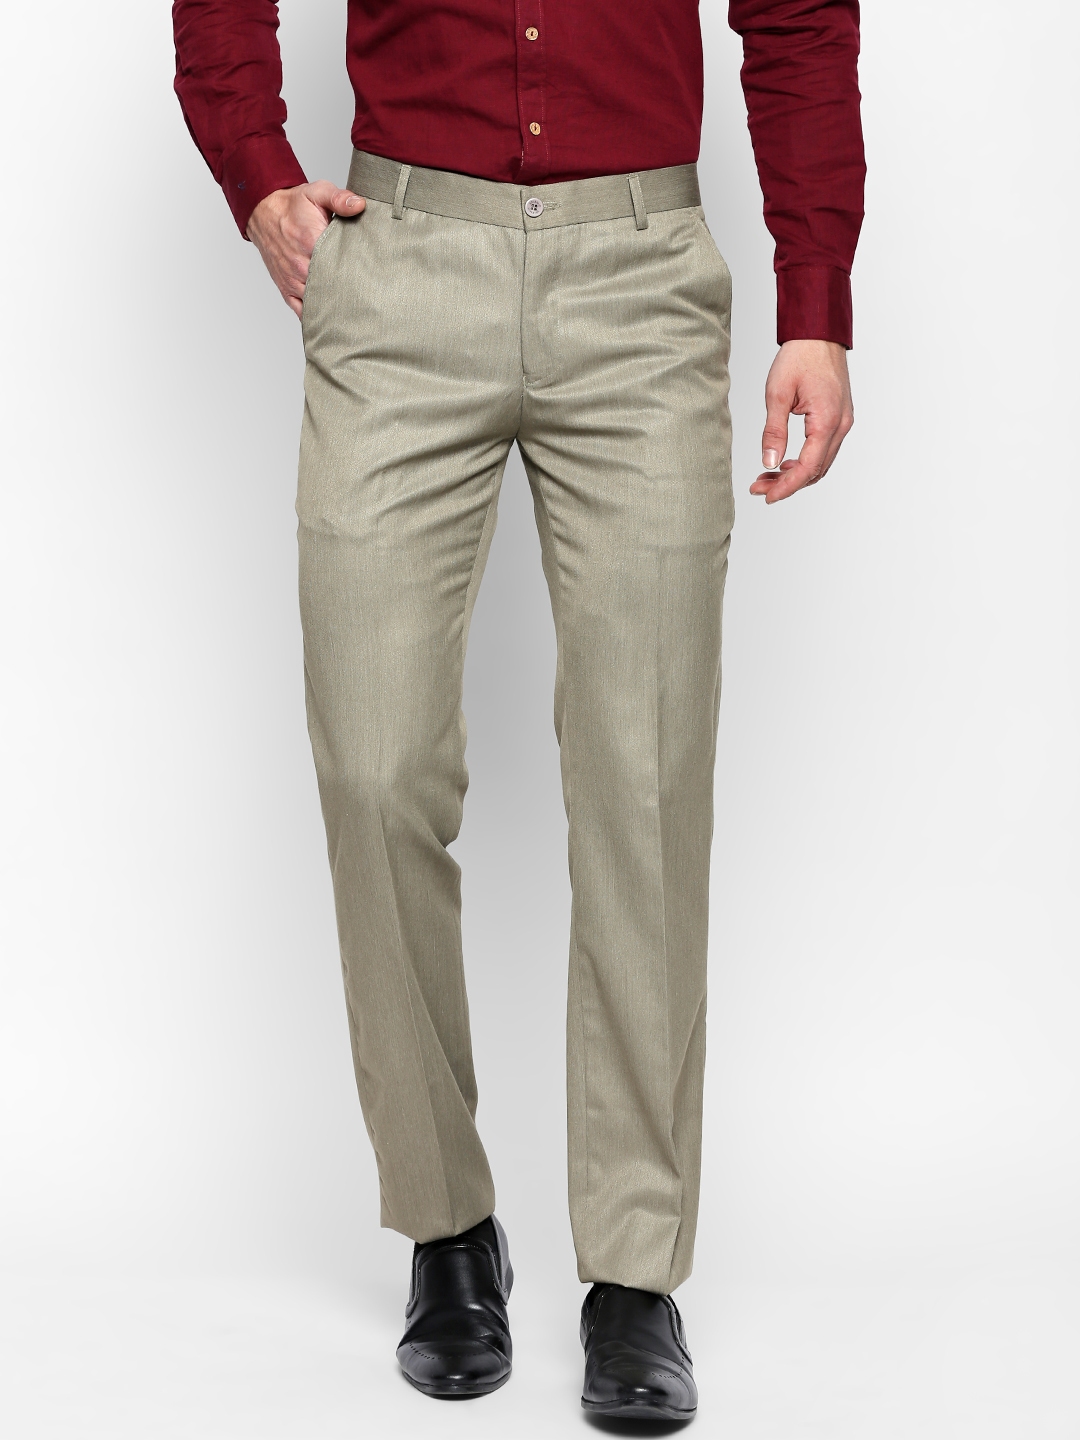 Buy Regular Fit Men Trousers White Beige and Brown Combo of 3 Polyester  Blend for Best Price, Reviews, Free Shipping